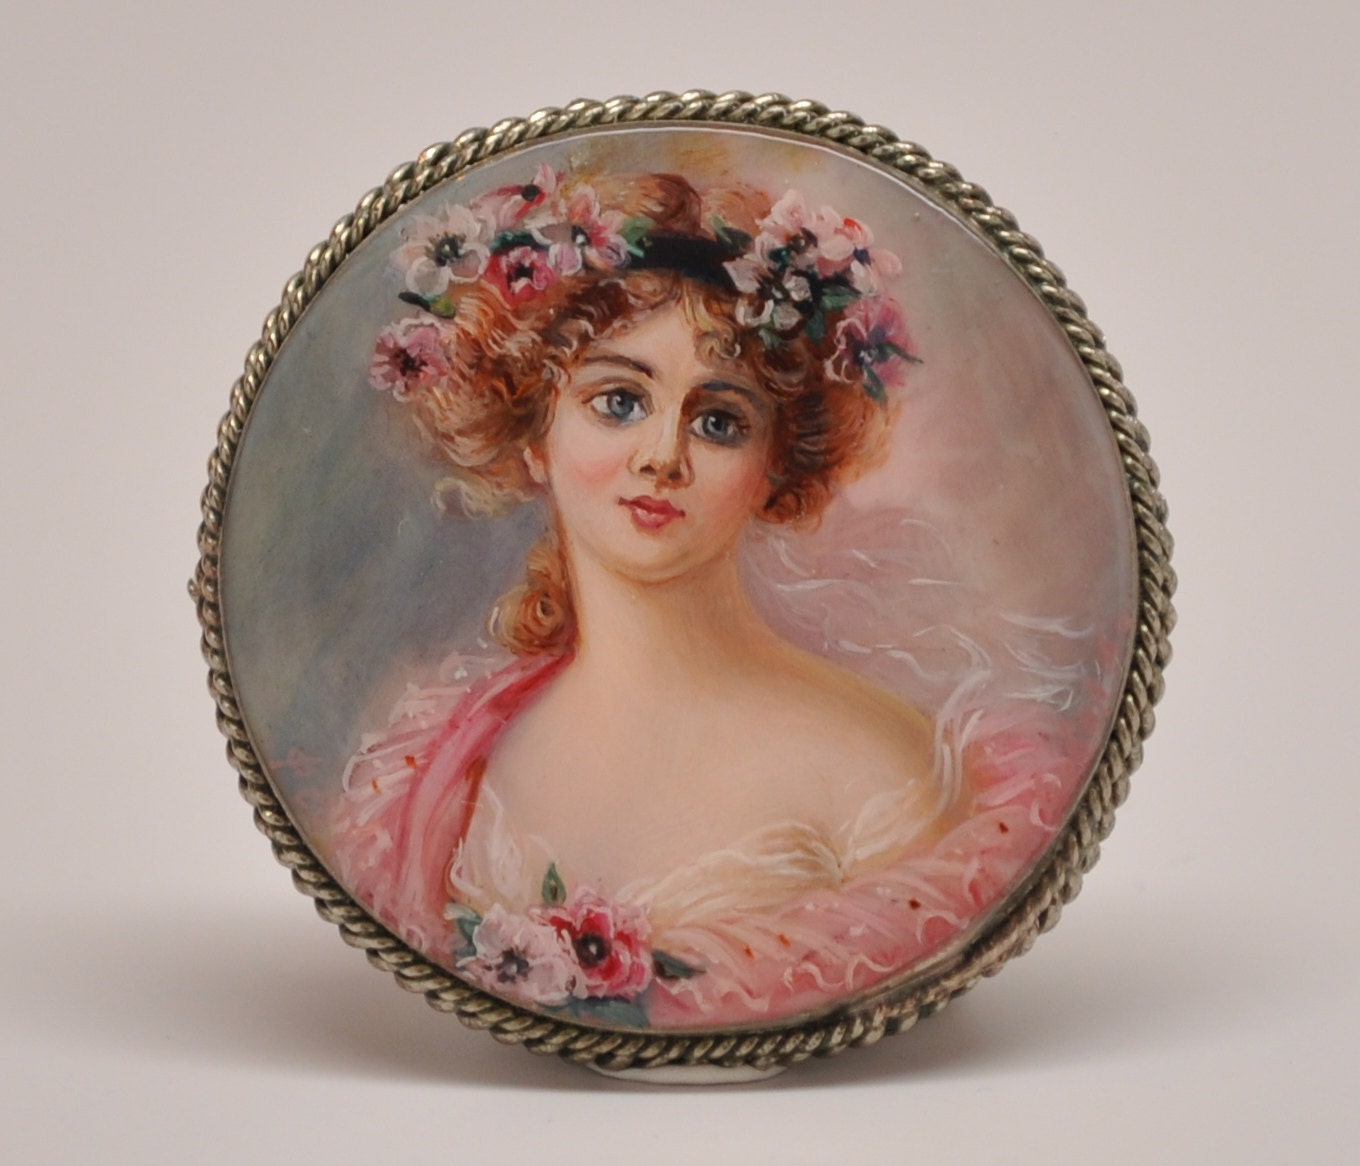 Russian Hand Painted Miniature Portrait Painting Brooch Pink Victorian Lady - FrenchQueensRansom